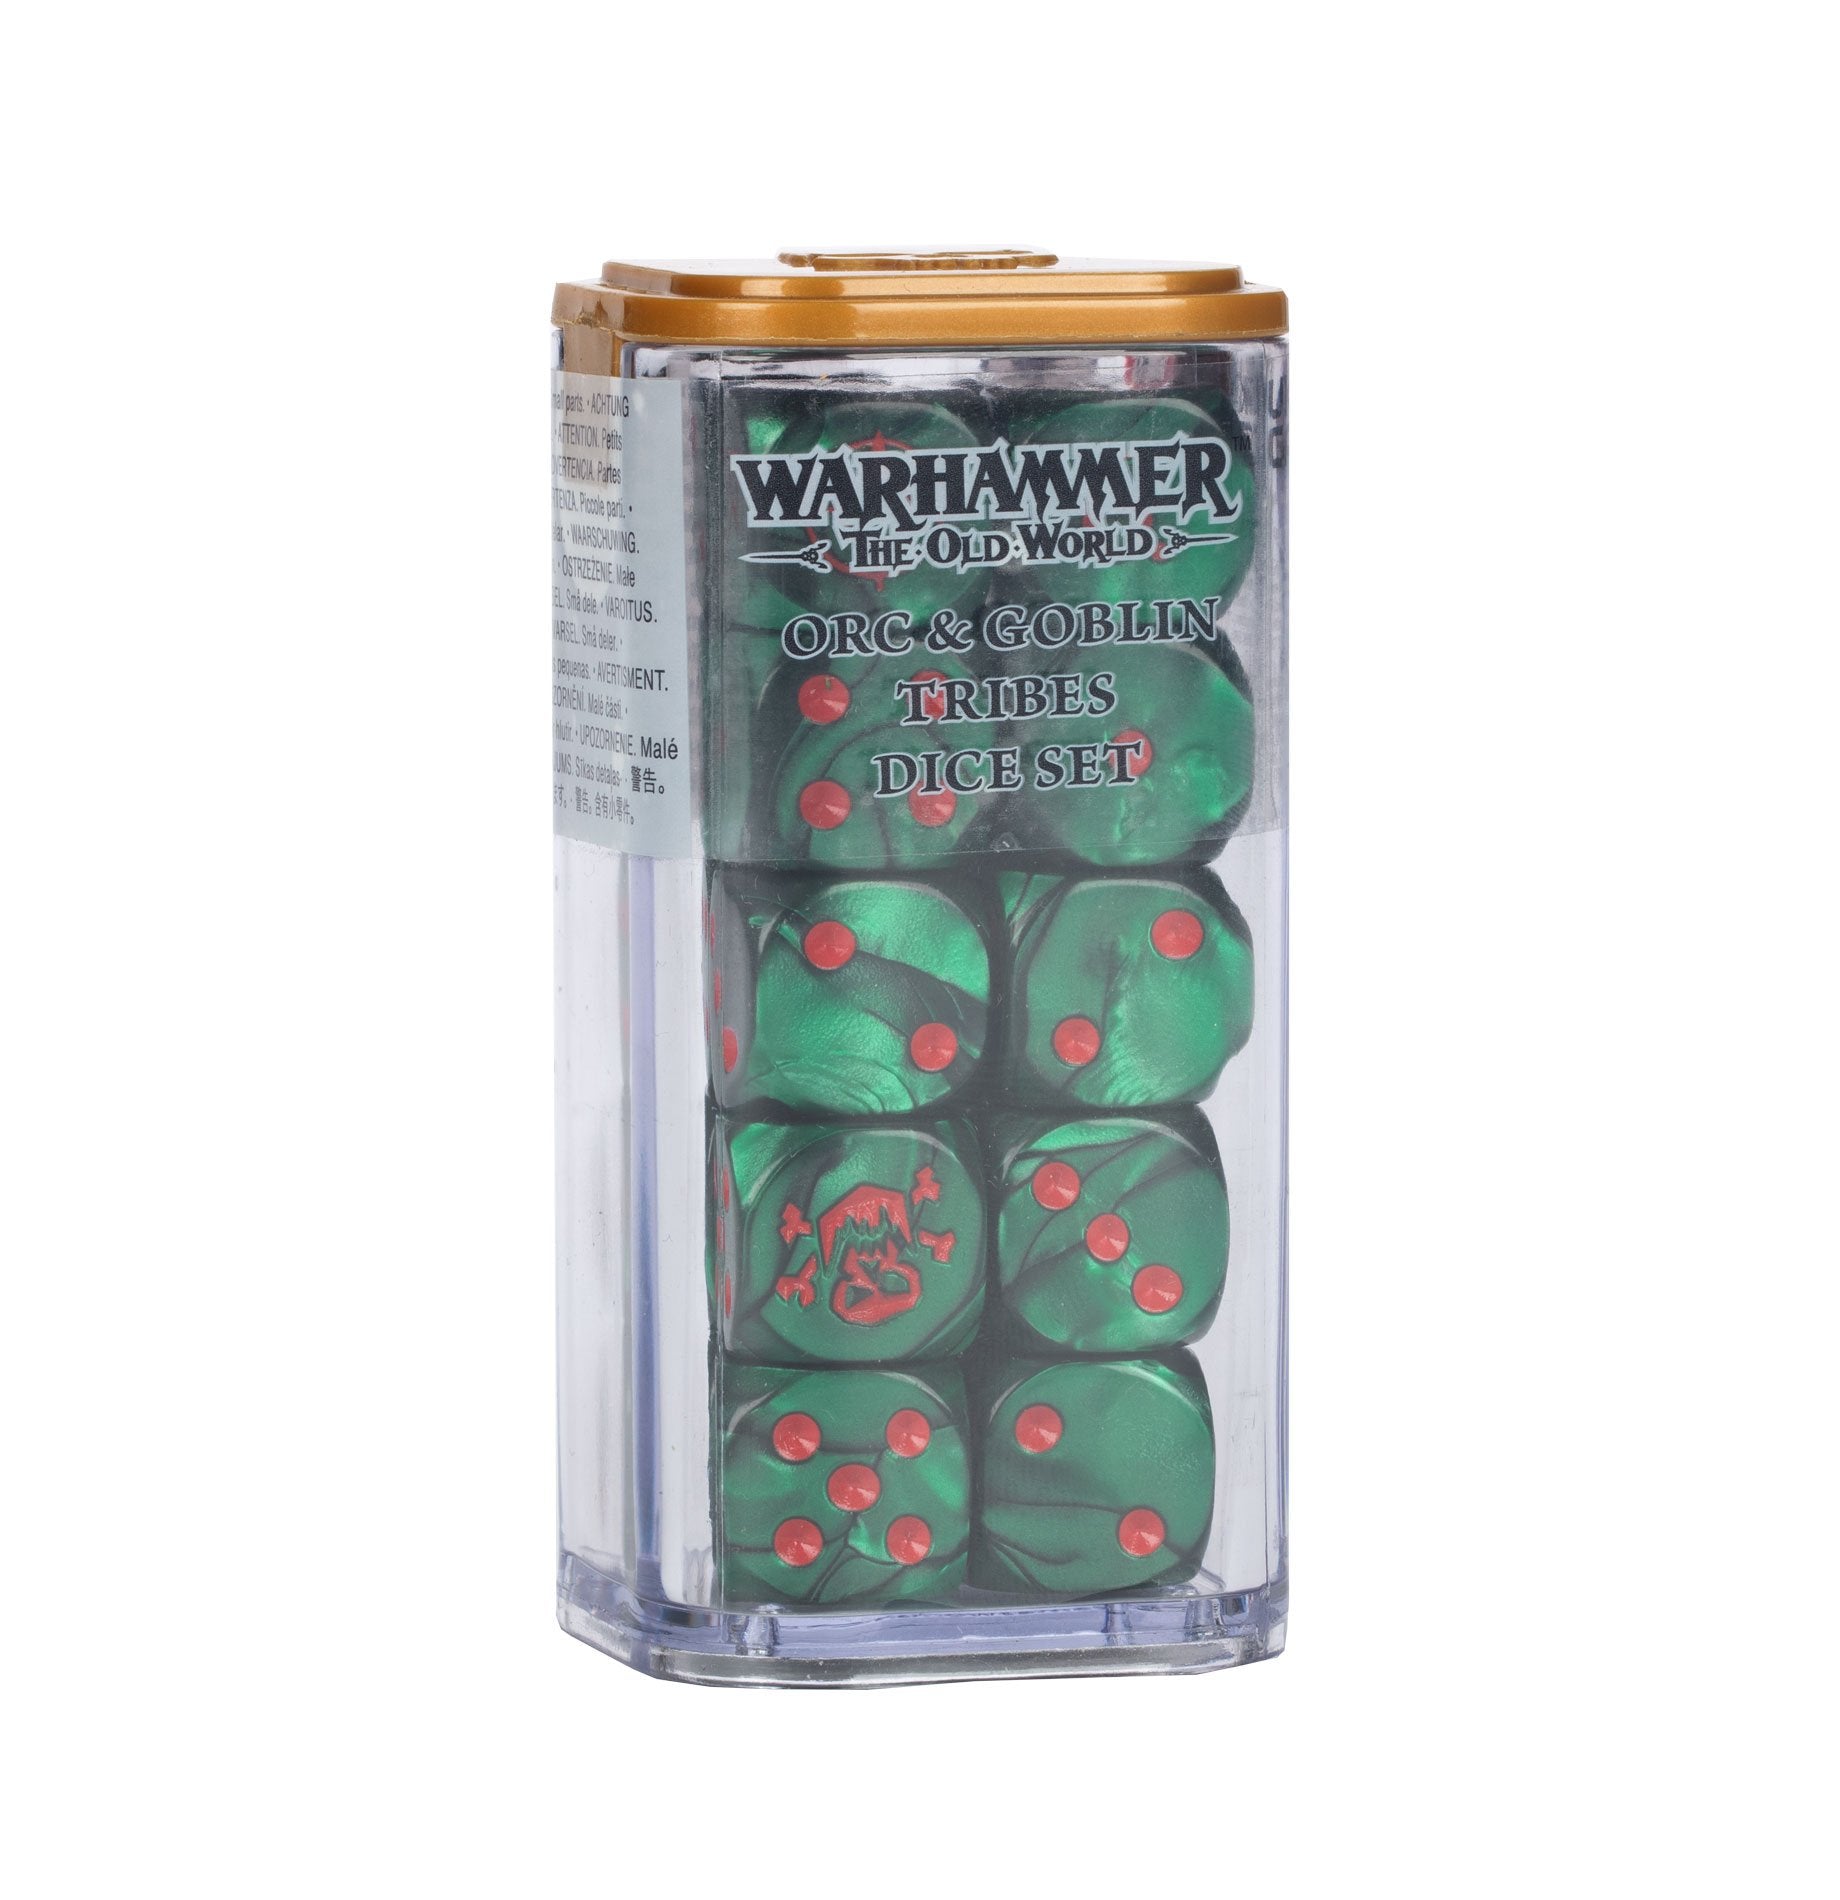 Orc & Goblin Tribes: Dice Set